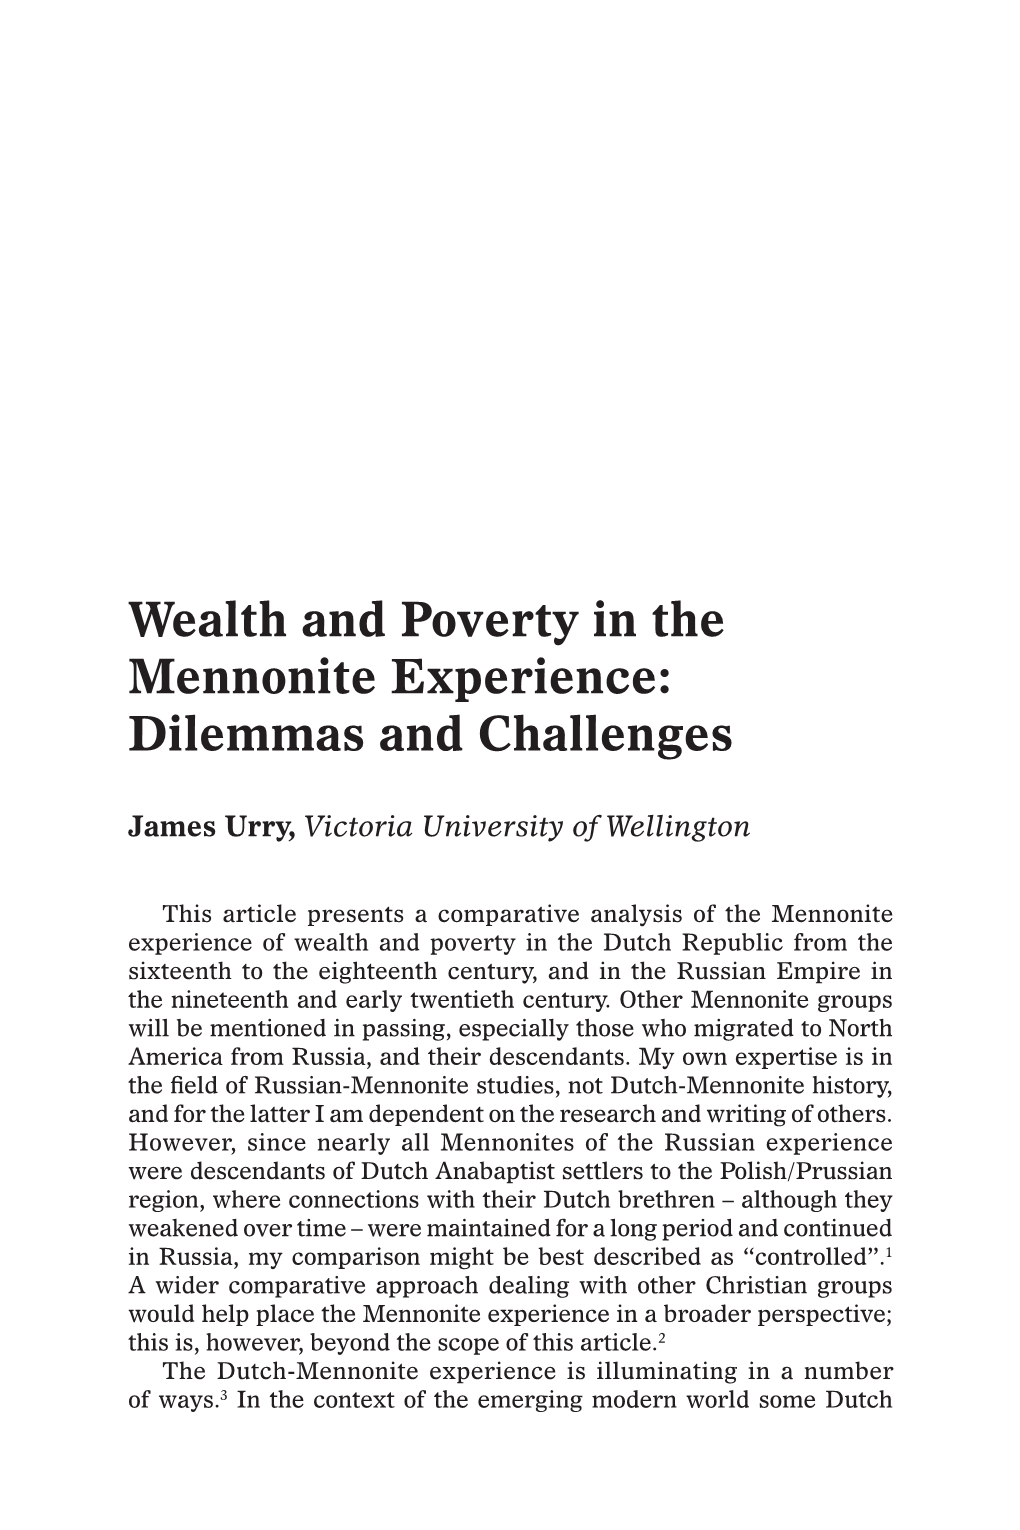 Wealth and Poverty in the Mennonite Experience: Dilemmas and Challenges